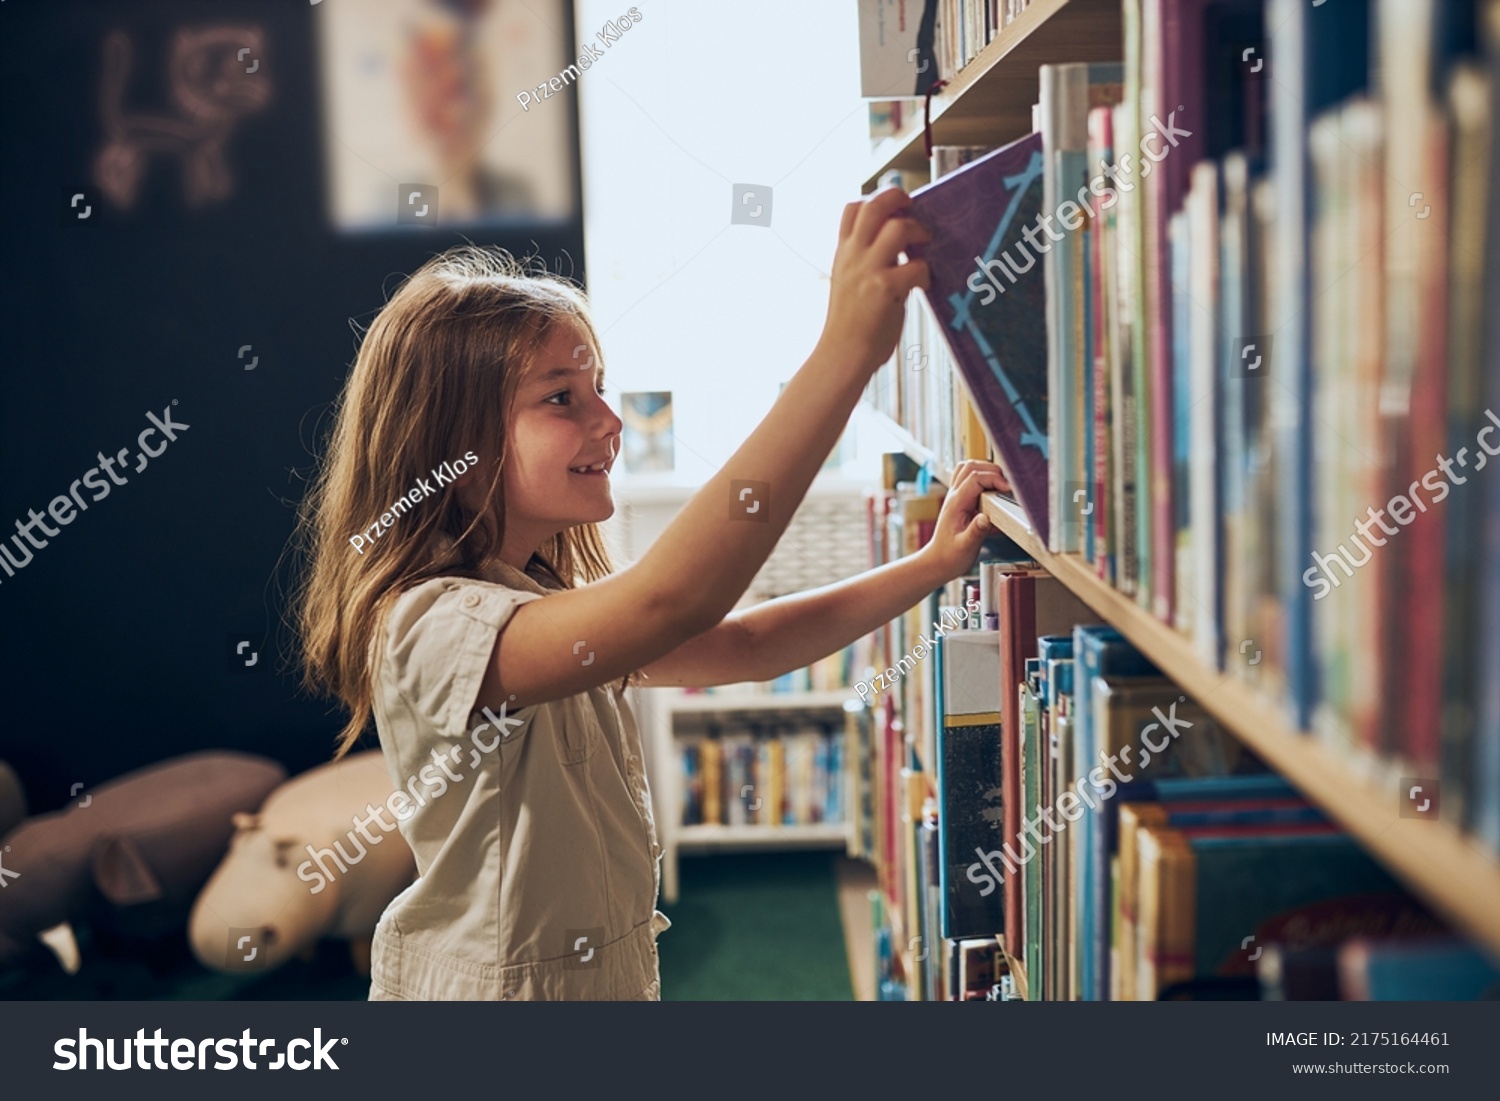 Schoolgirl choosing book in school library. Smart girl selecting literature for reading. Books on shelves in bookstore. Learning from books. School education. Benefits of everyday reading #2175164461